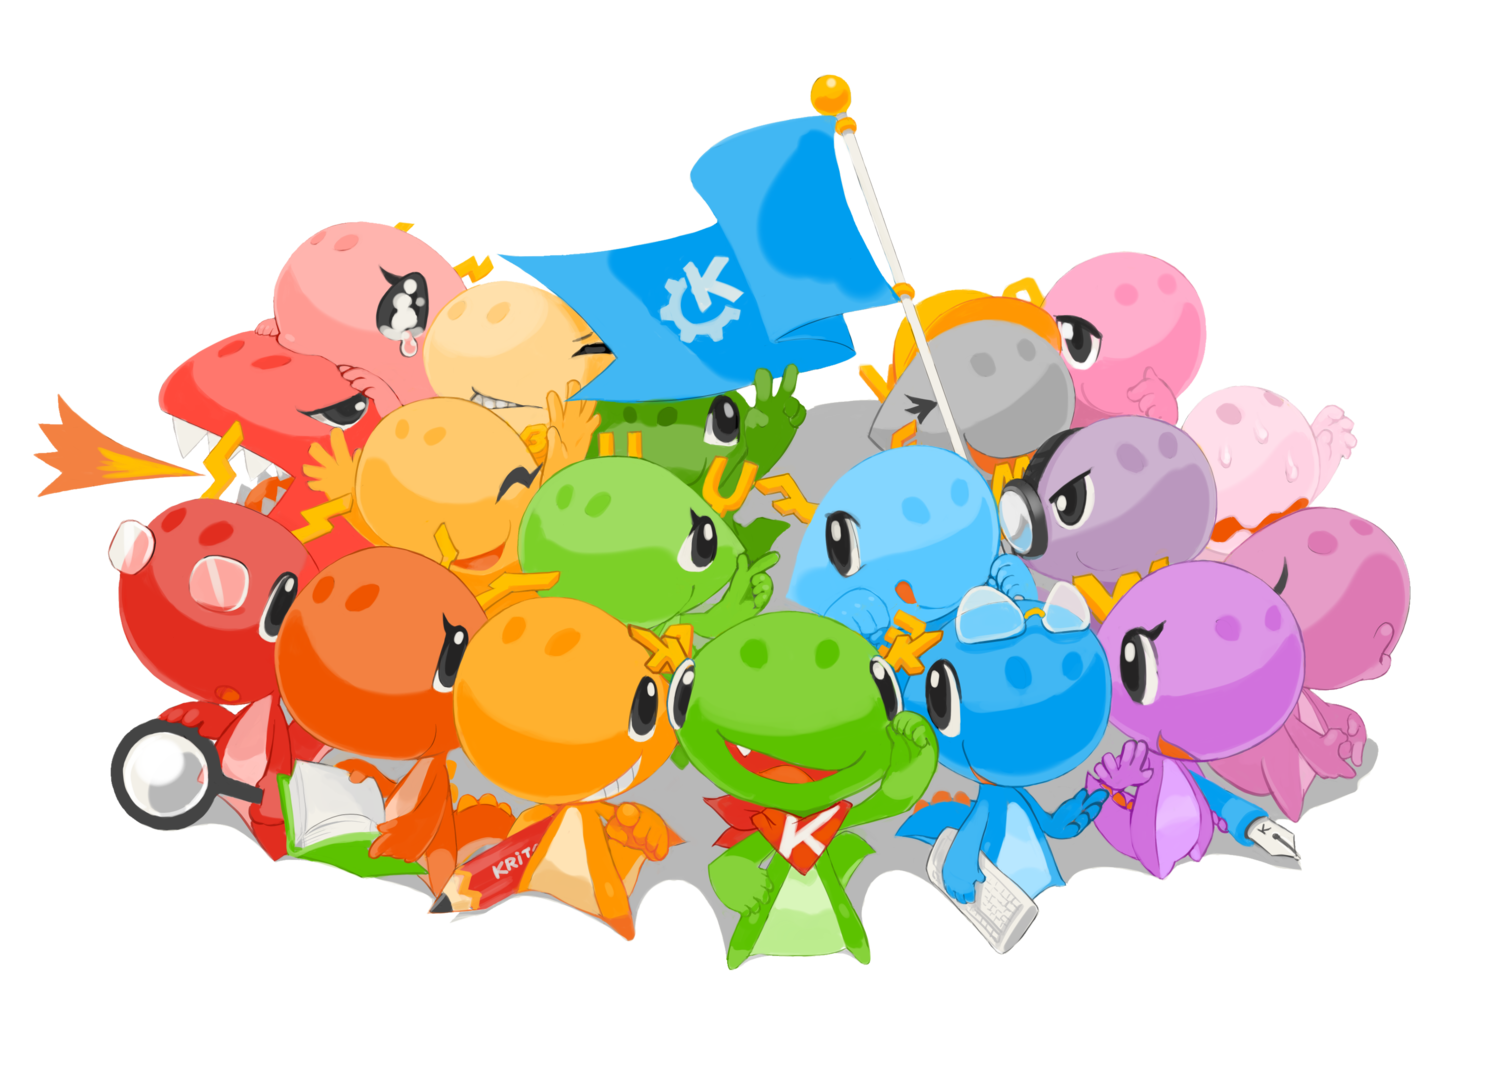 Image of dragons in different colors representing the diverse and inclusive KDE community